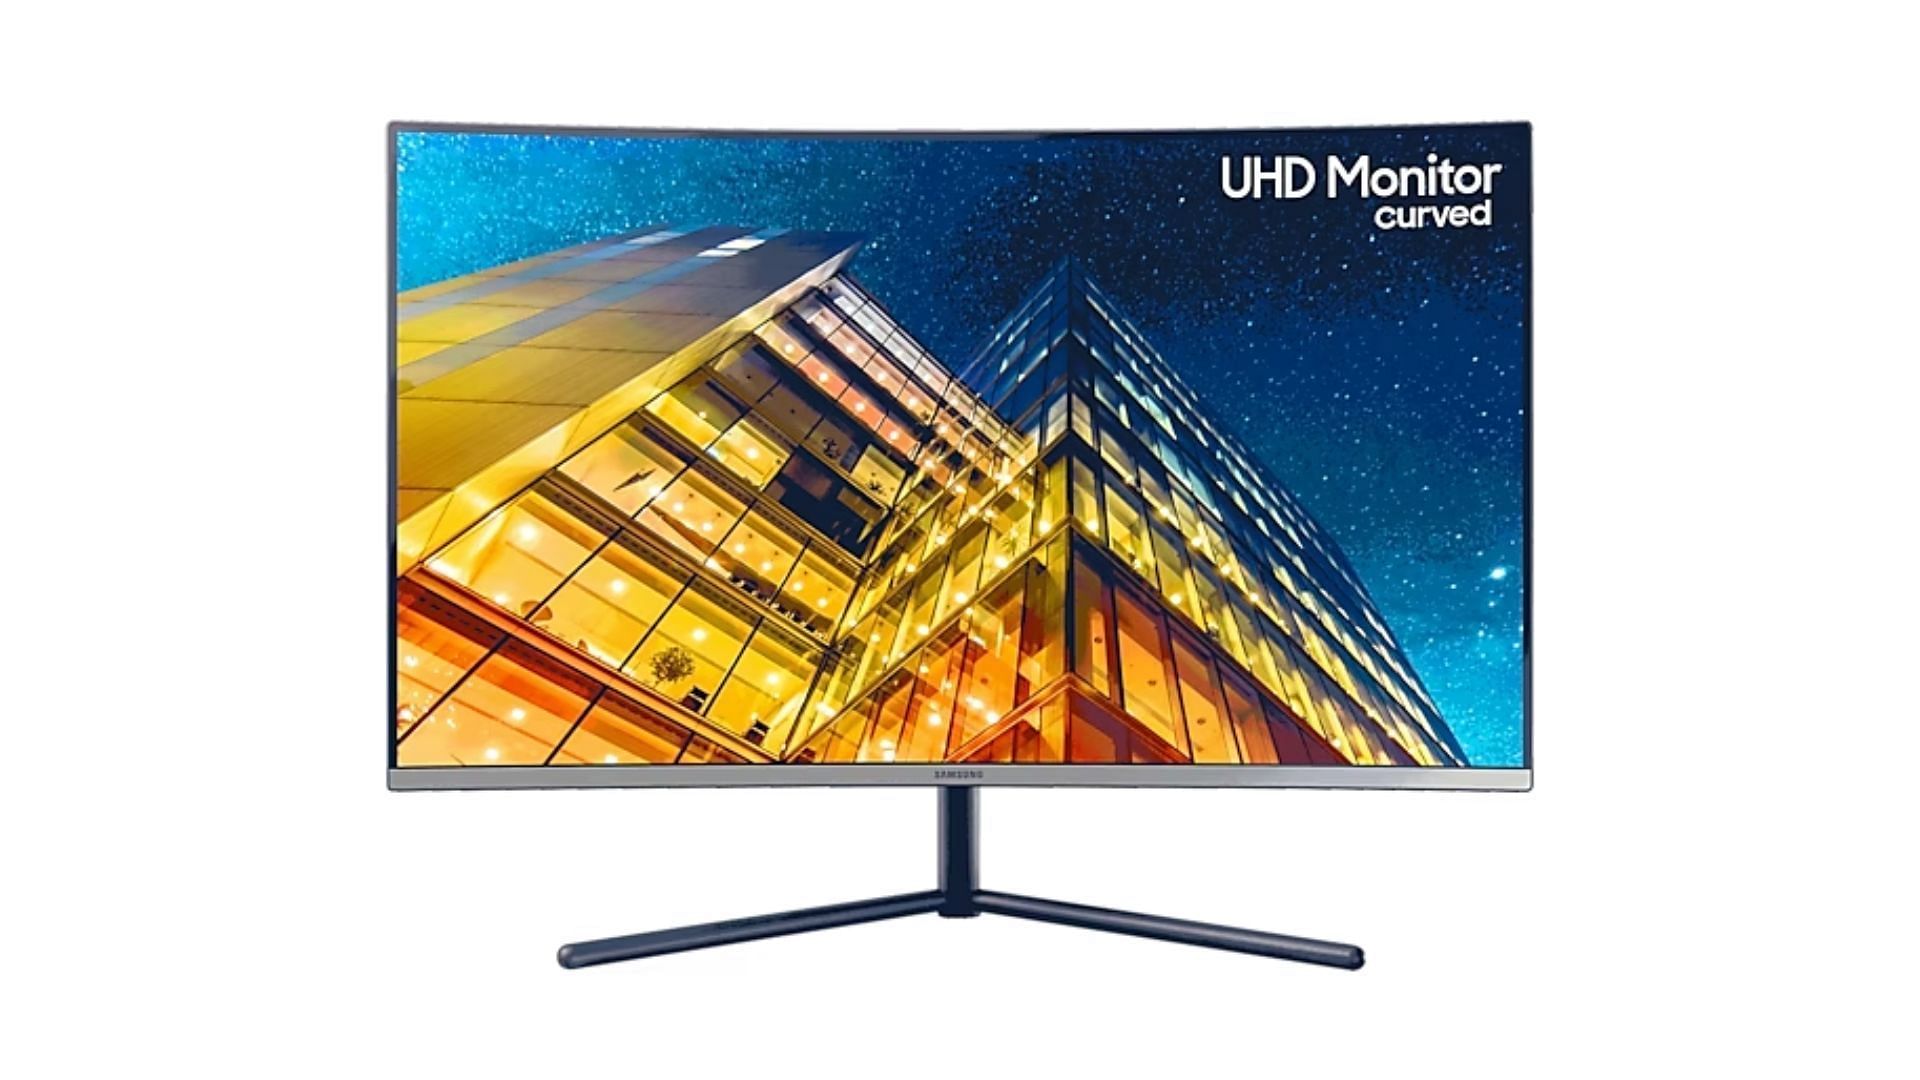 Curved gaming monitor at an affordable price (Image via Samsung)